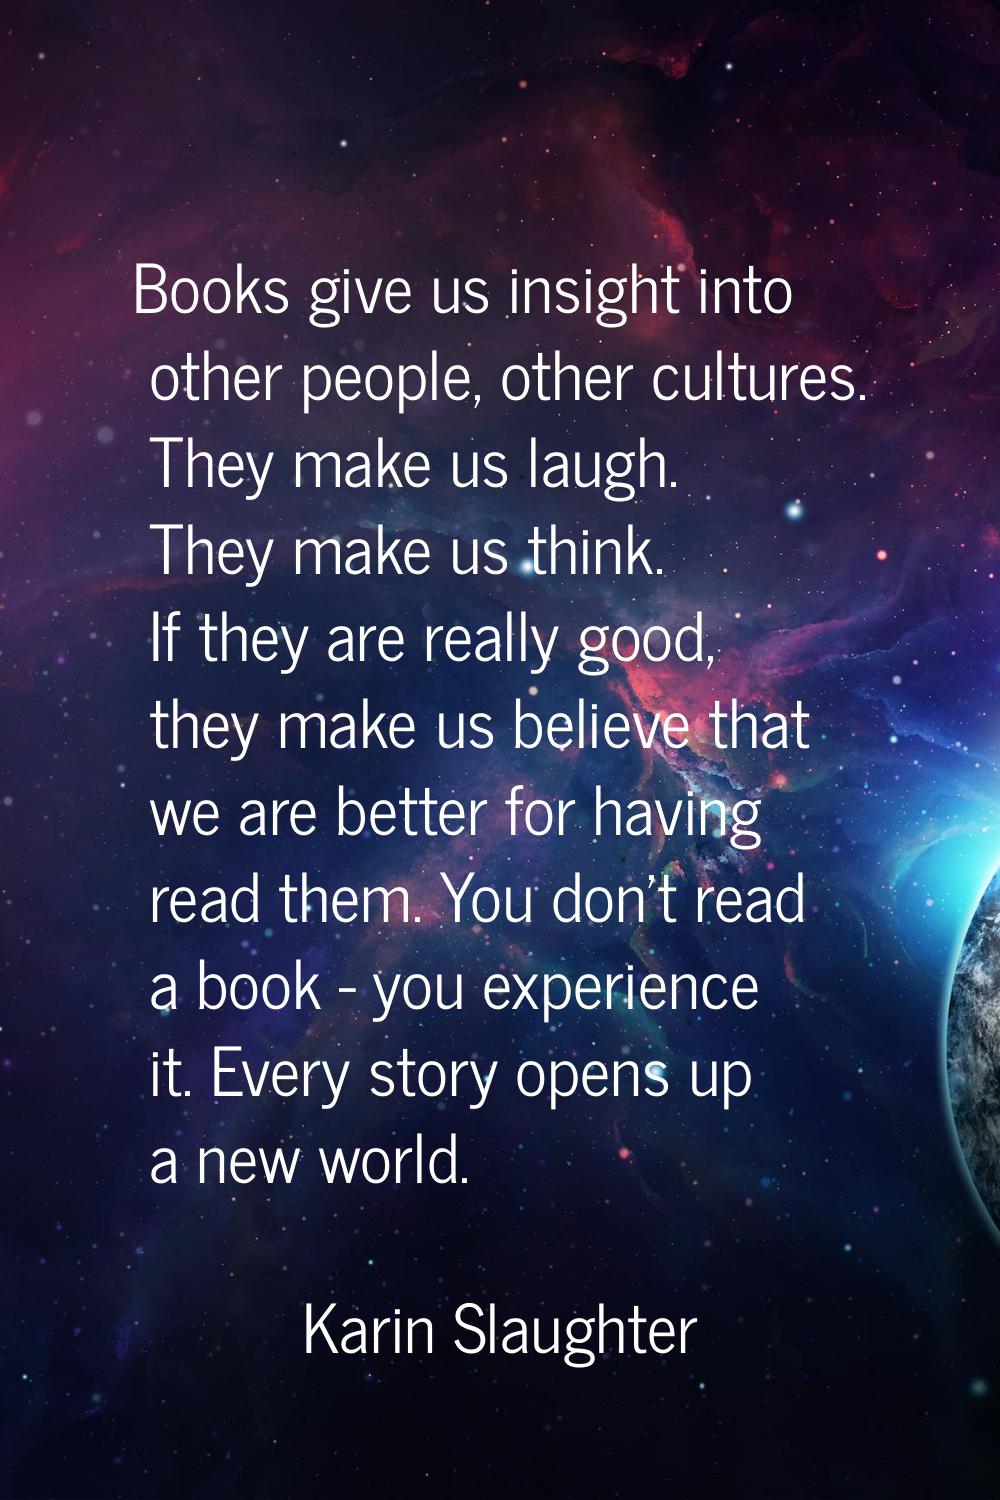 Books give us insight into other people, other cultures. They make us laugh. They make us think. If